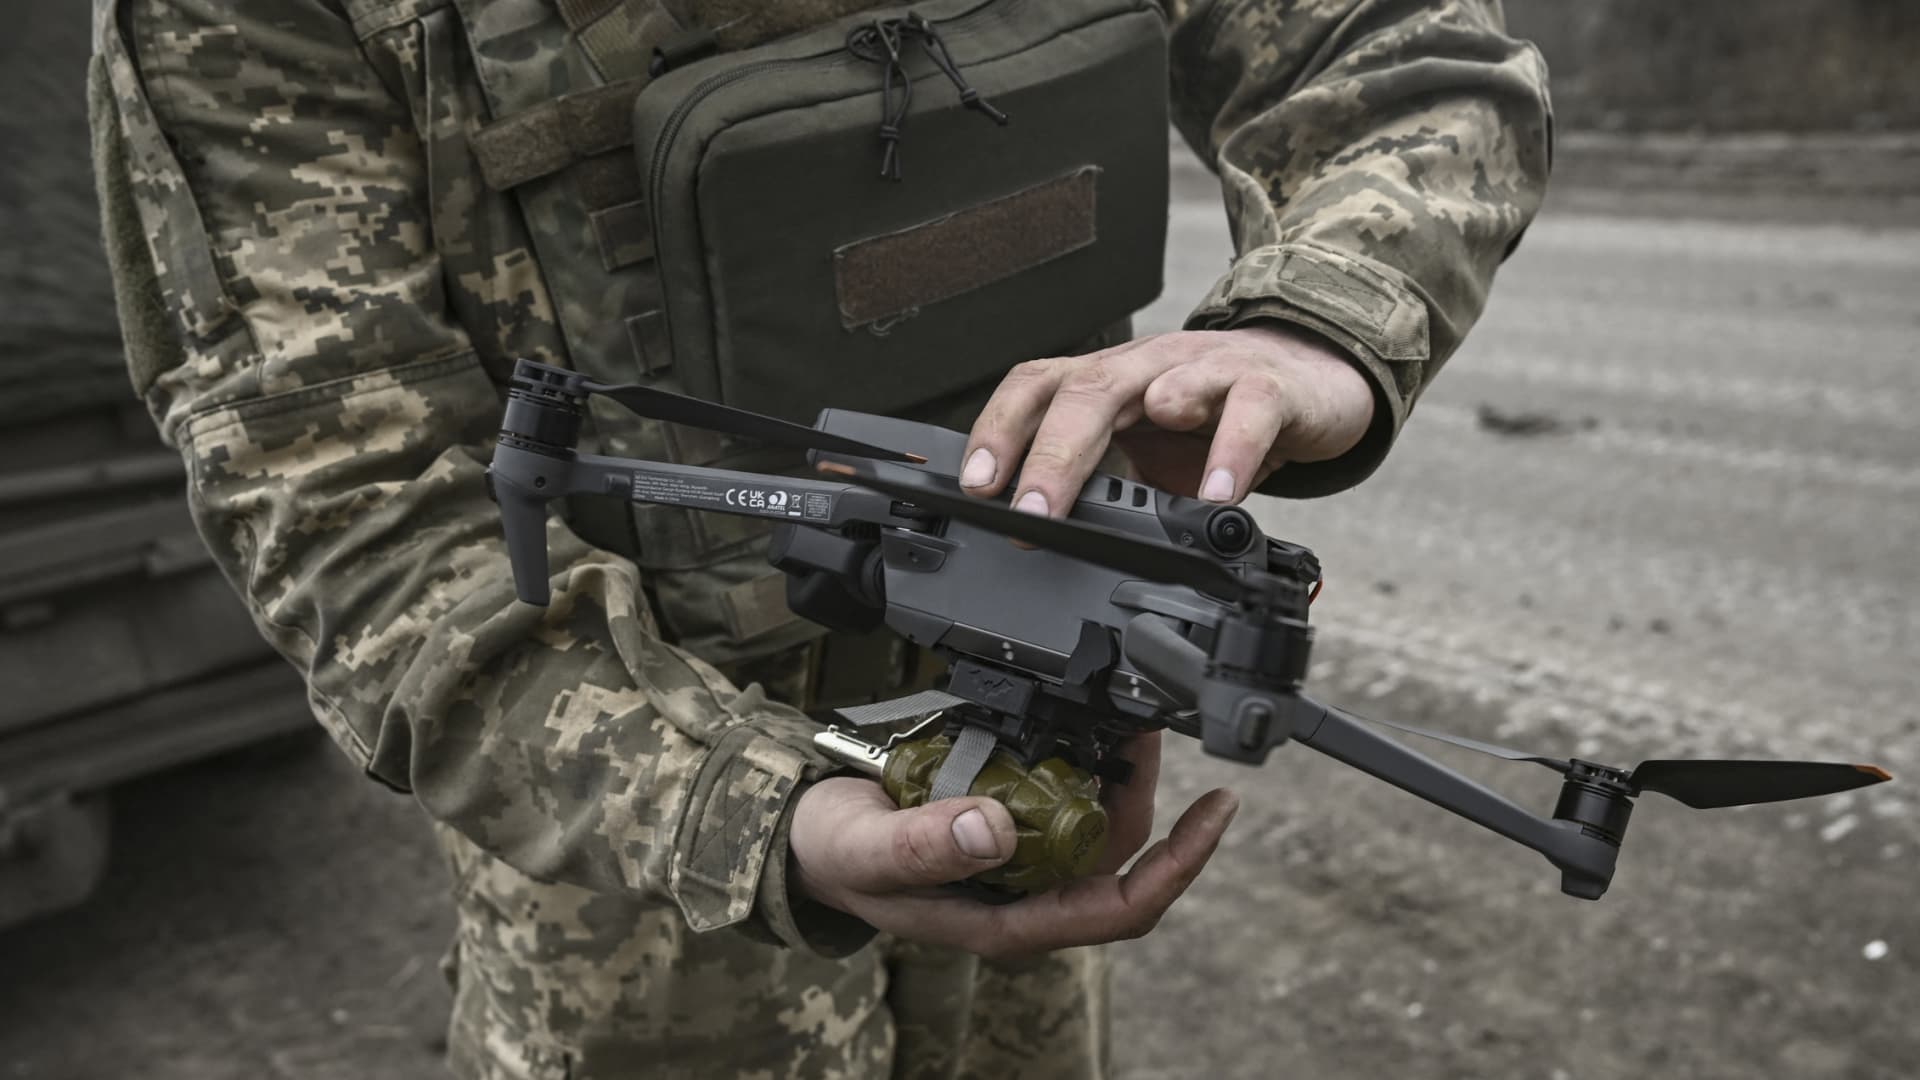 An Ukrainian serviceman attaches a hand grenade on a drone to use in an attack, near Bachmut, in the region of Donbas, on March 15, 2023. 